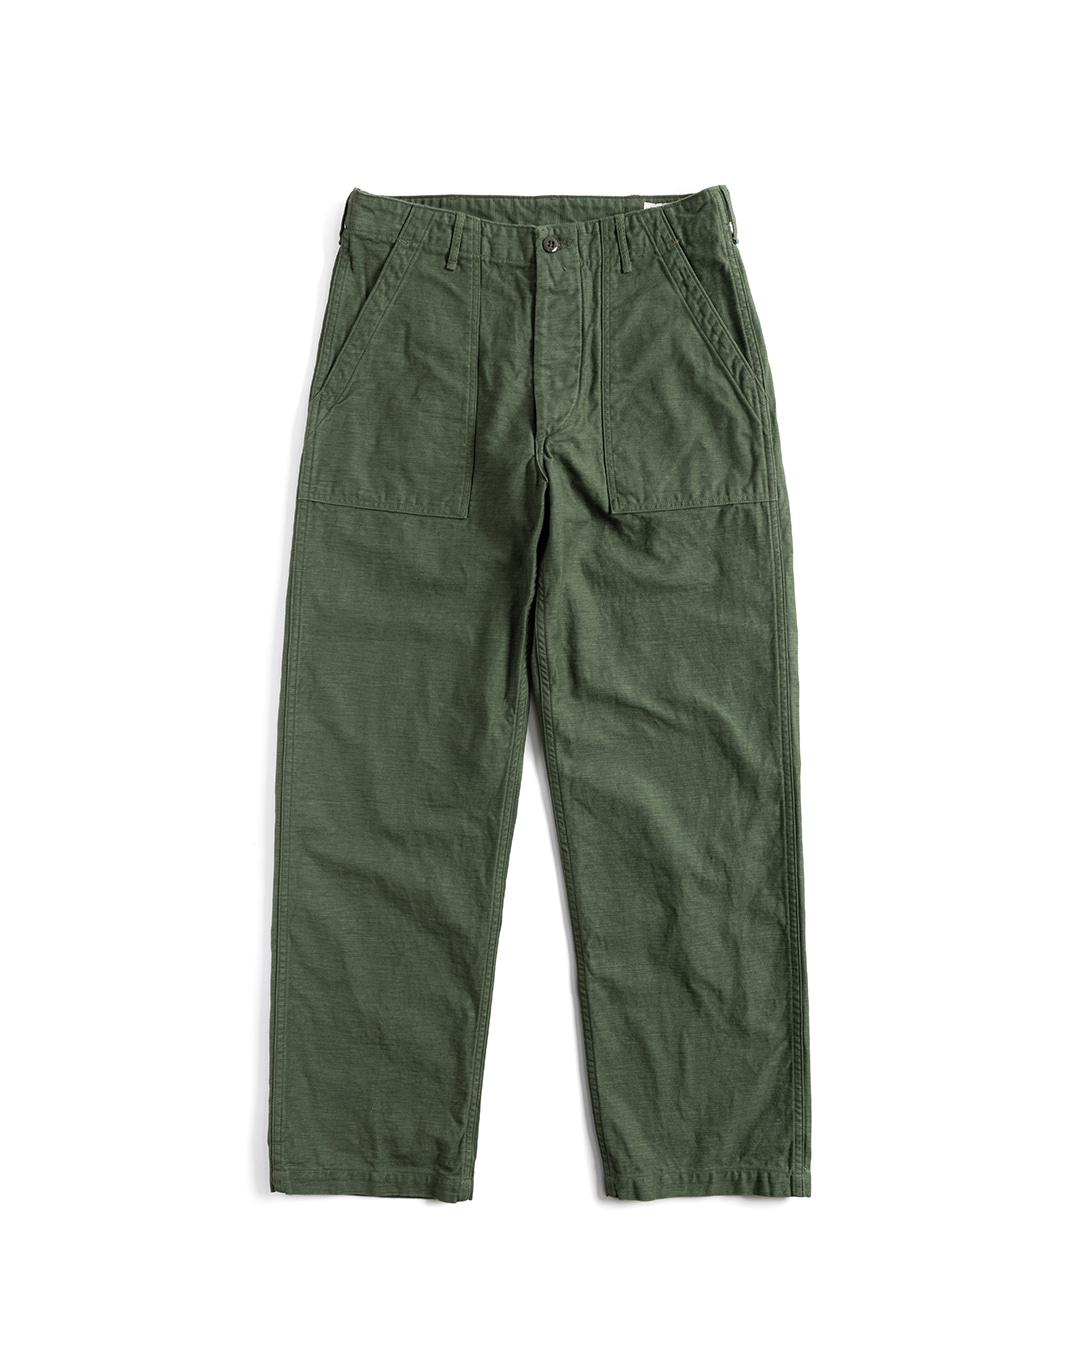 US ARMY FATIGUE PANTS (olive green)